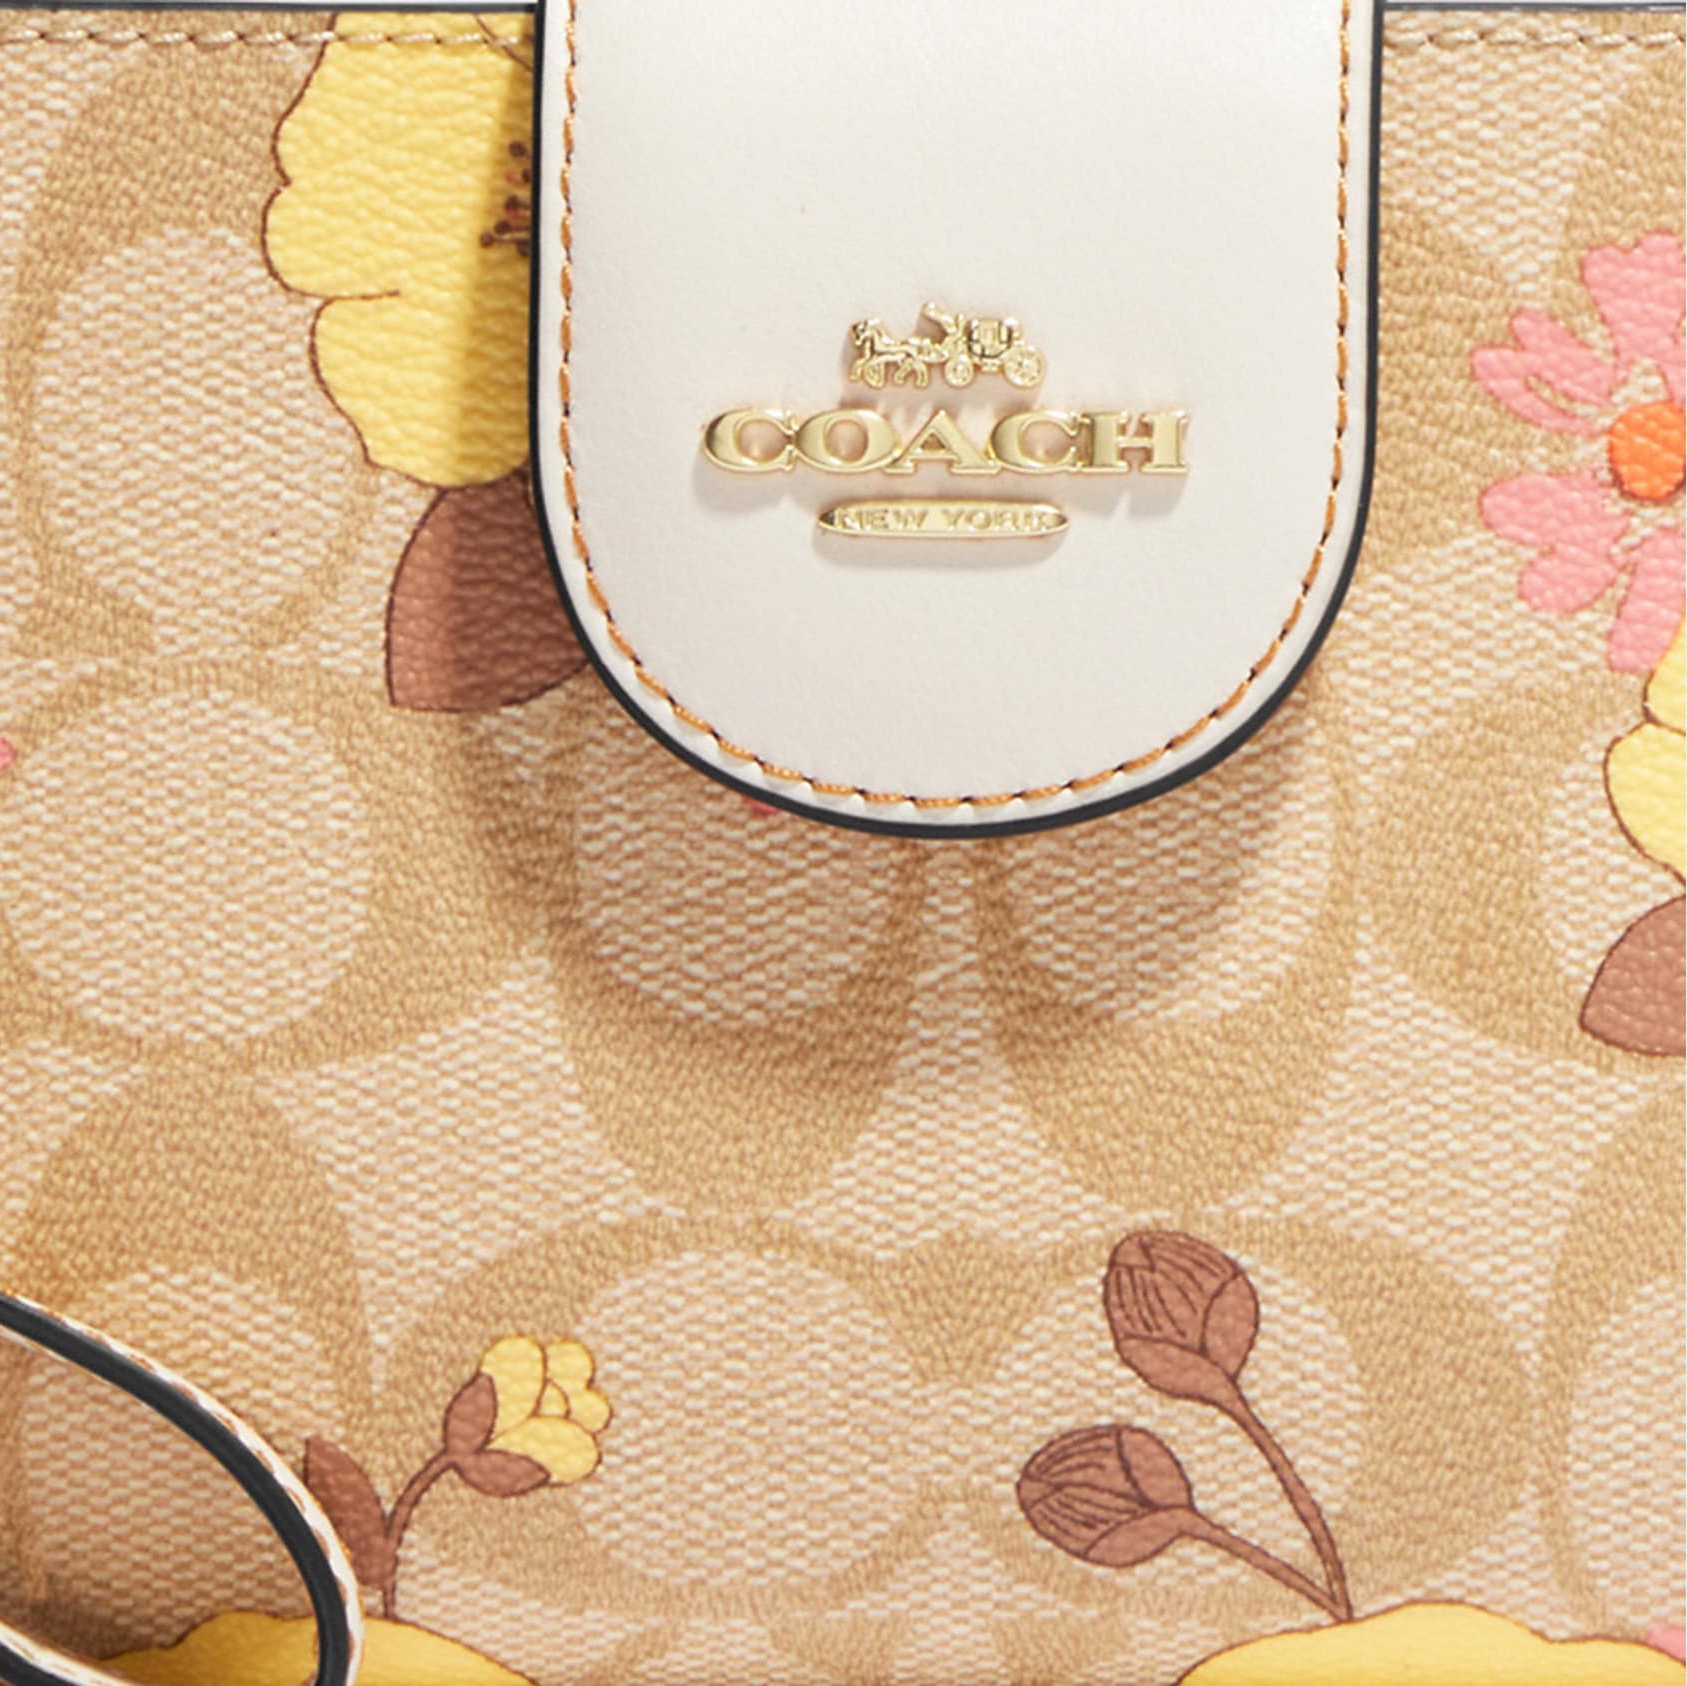 VÍ NỮ CẦM TAYCOACH IN HOA TECH WALLET IN SIGNATURE CANVAS WITH FLORAL CLUSTER PRINT CH720 1